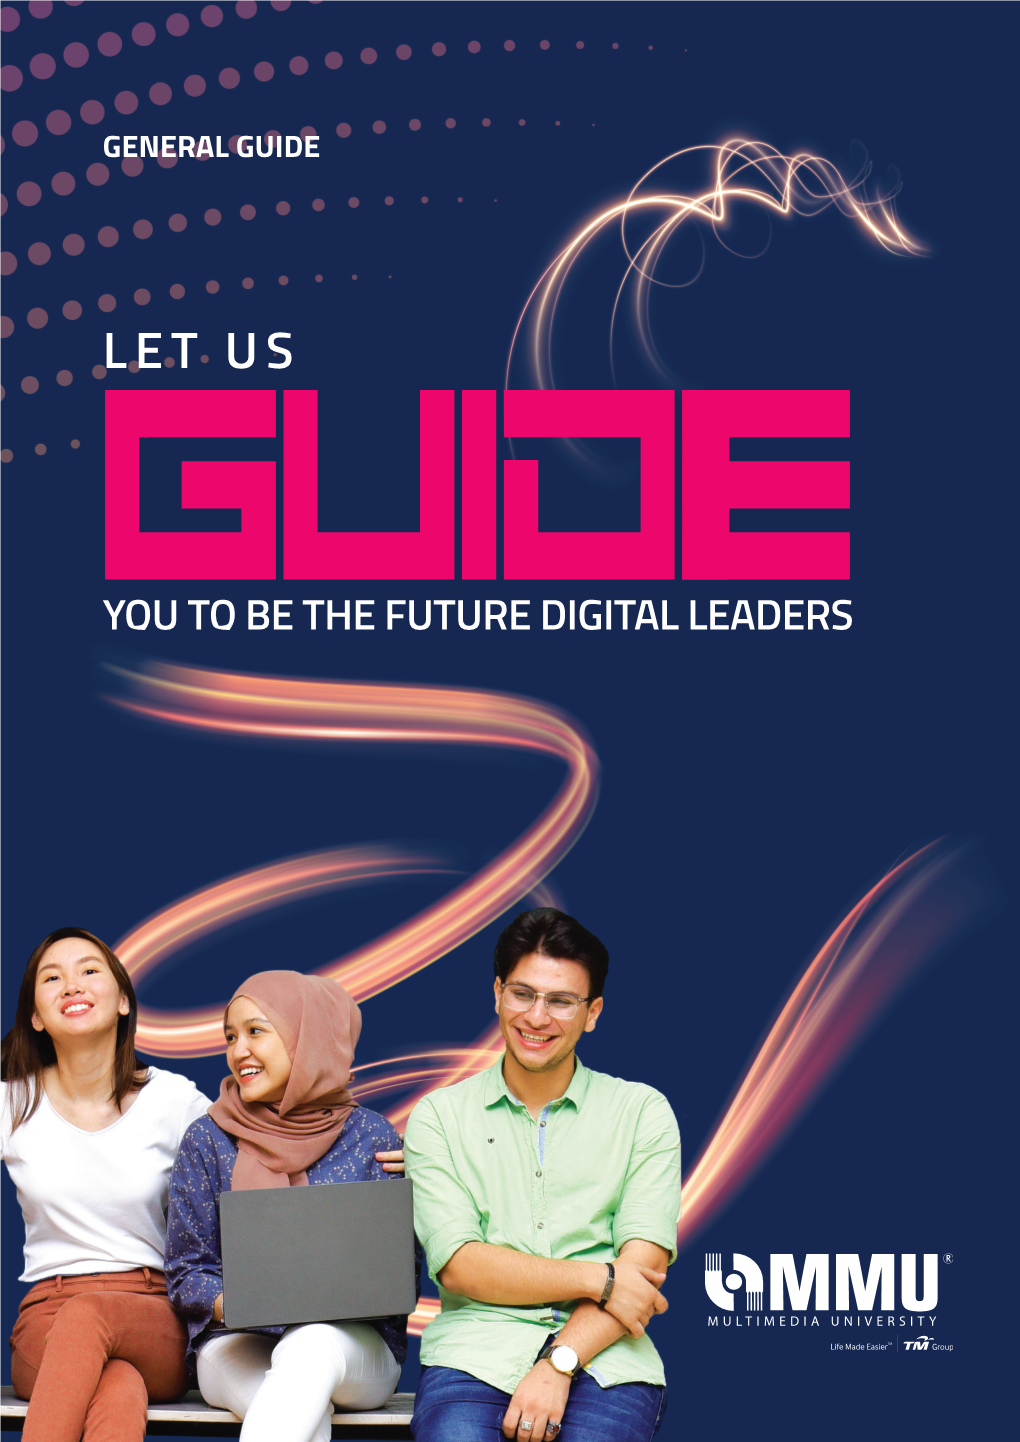 LET US E YOU to BE the FUTURE DIGITAL LEADERS This Prospectus Uses Augmented Reality to Give the Reader a Glimpse of MMU’S Experience